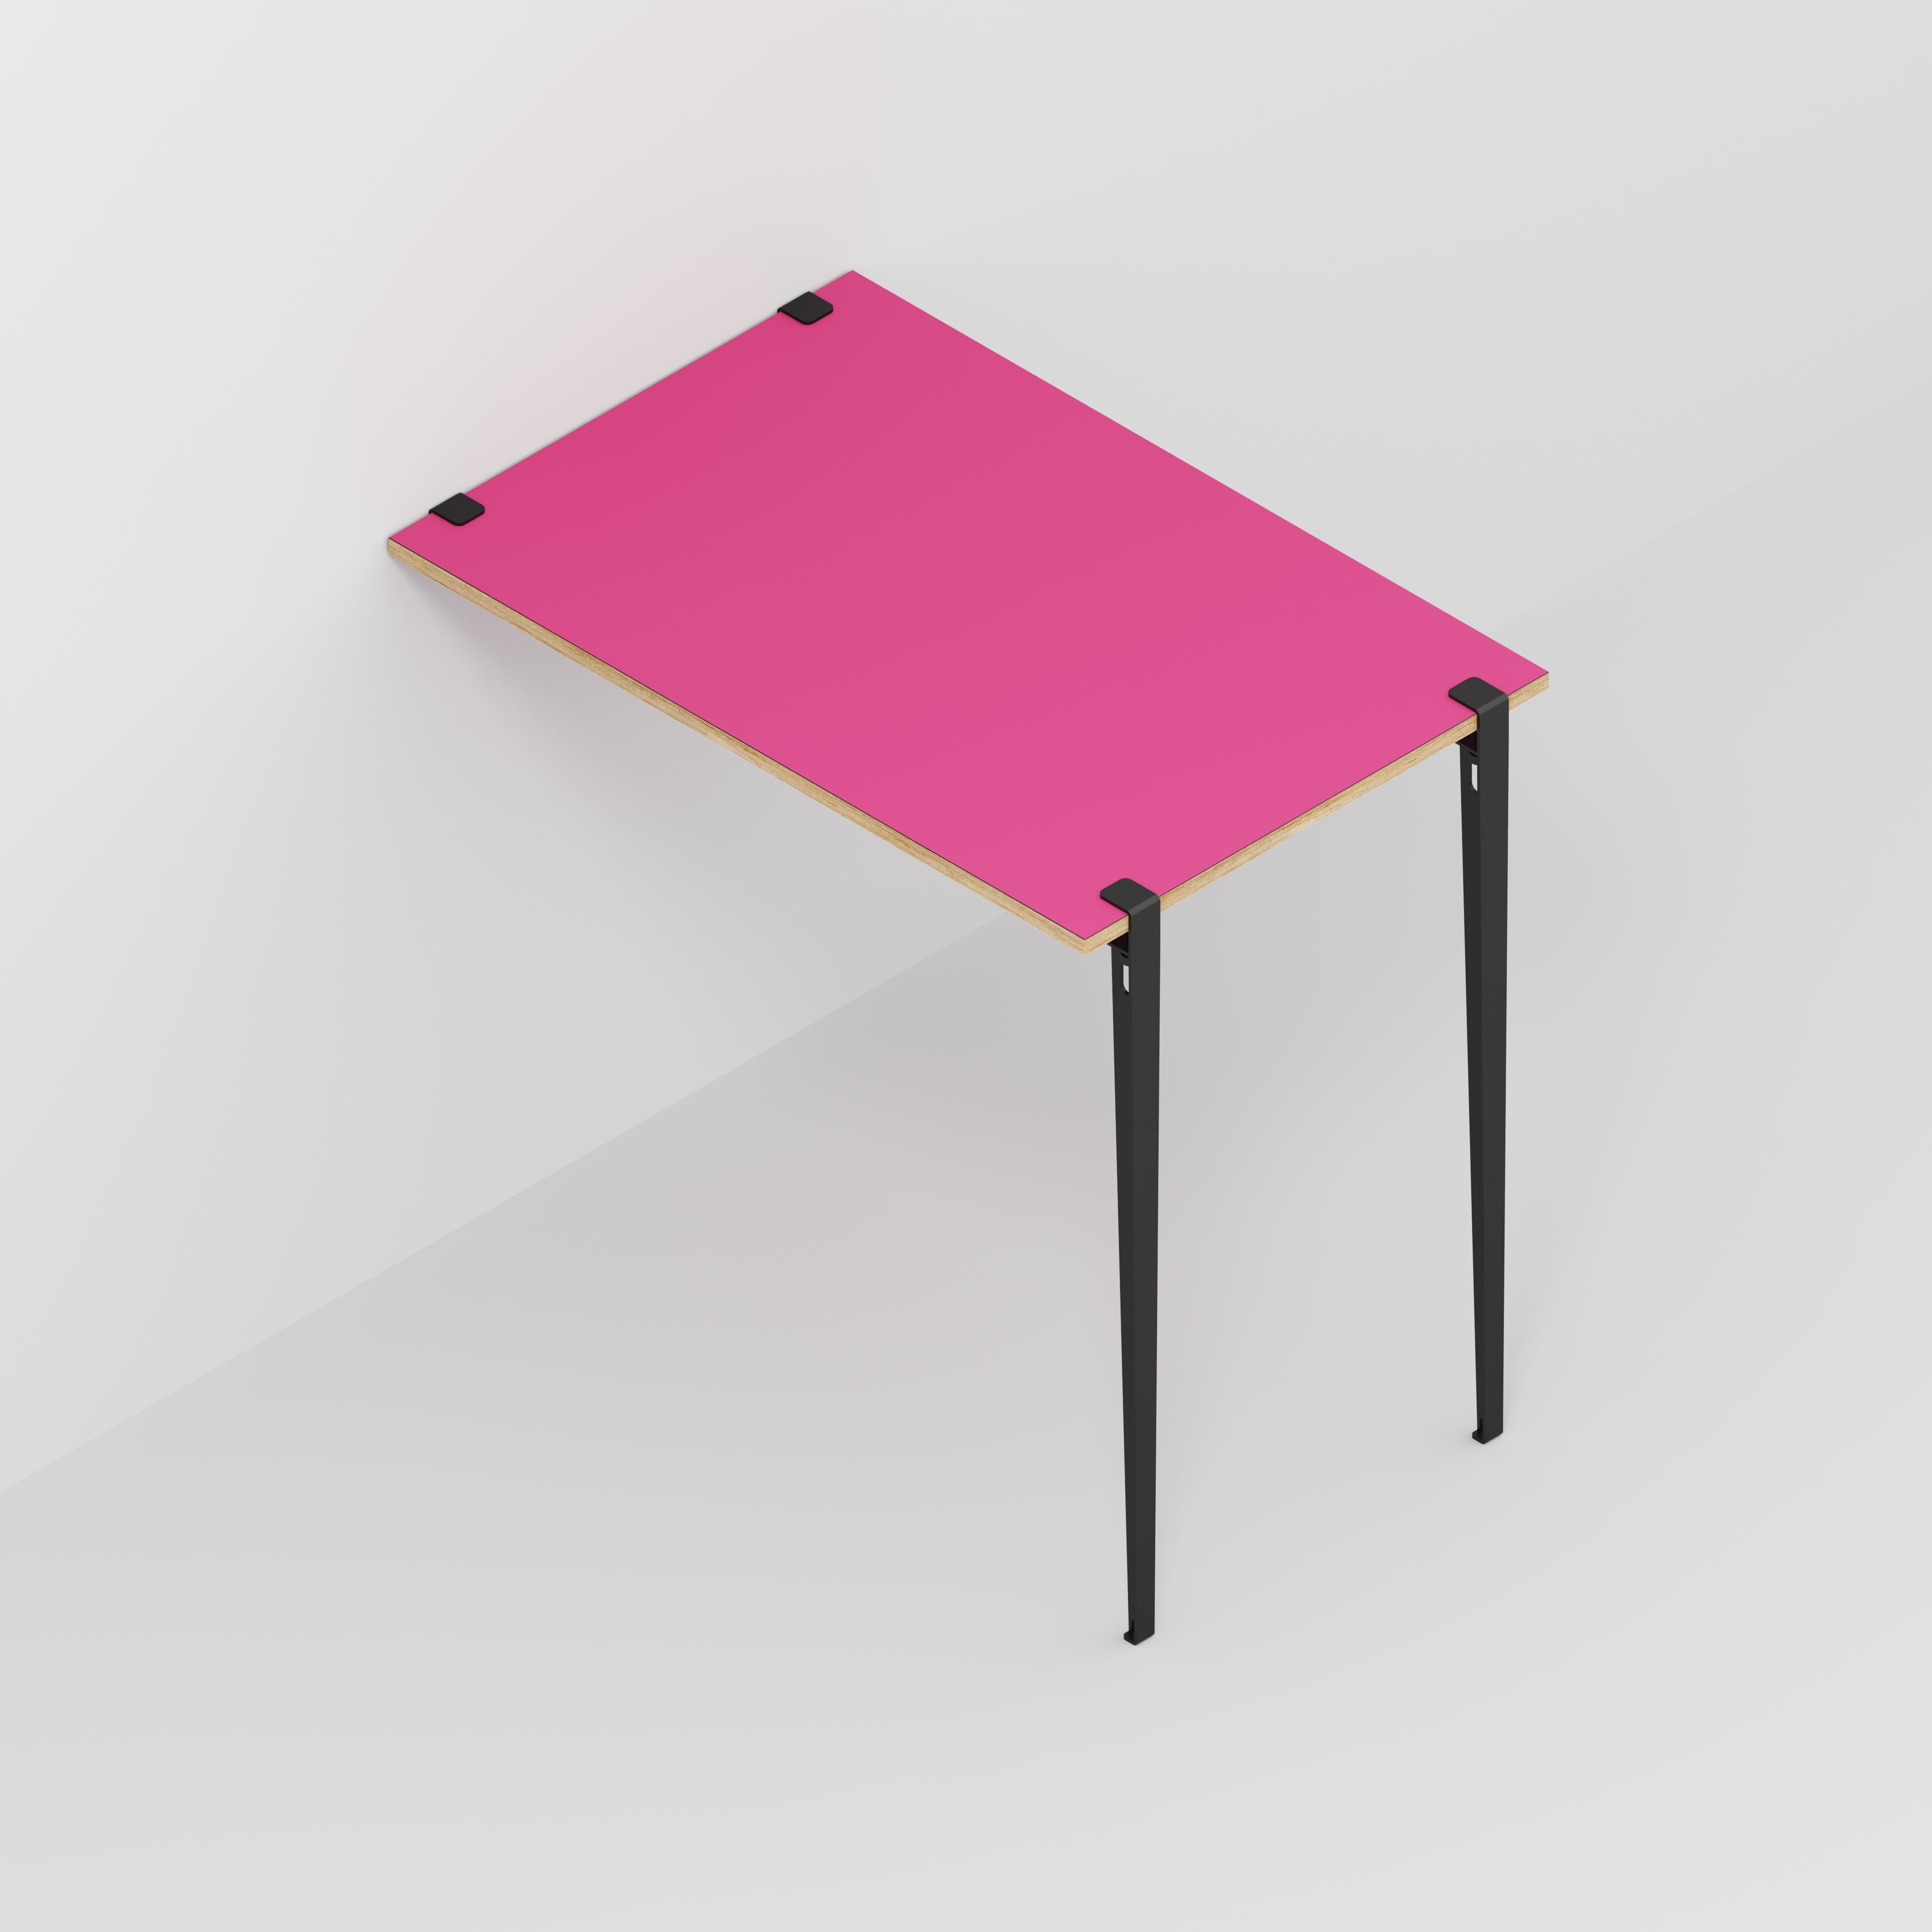 Wall Table with Black Tiptoe Legs and Brackets - Formica Juicy Pink - 1200(w) x 800(d) x 1100(h)